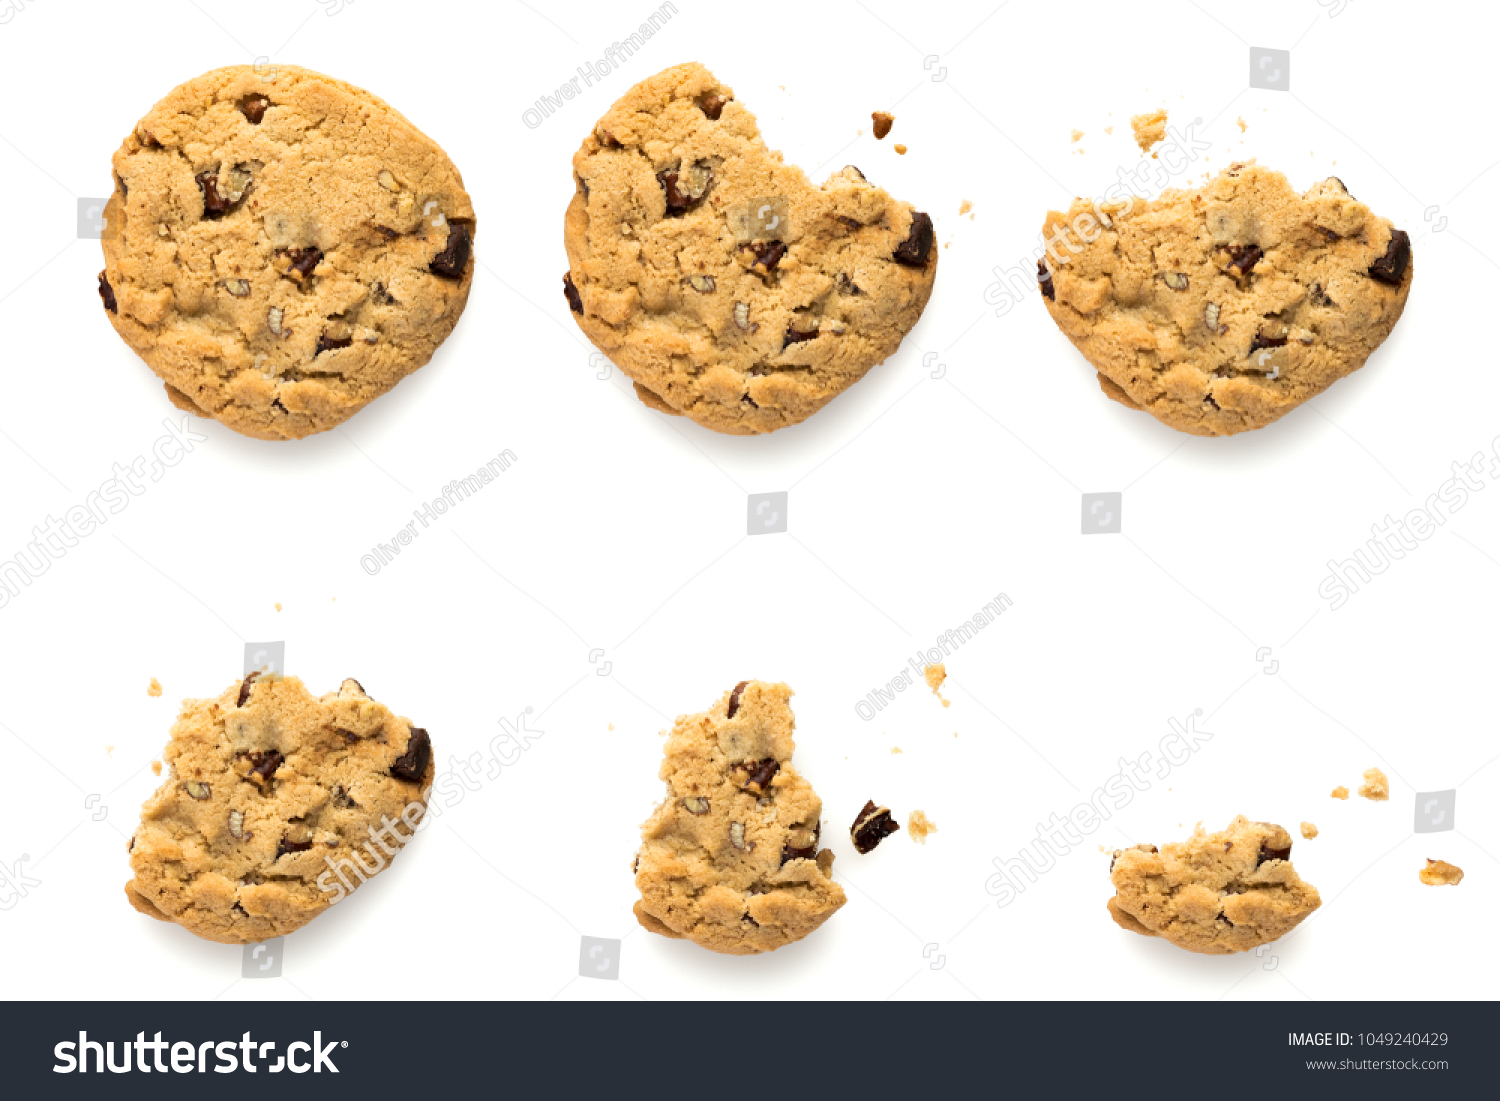 Six steps of chocolate chip cookie with pecan nuts being devoured. Sequence isolated on white background. #1049240429